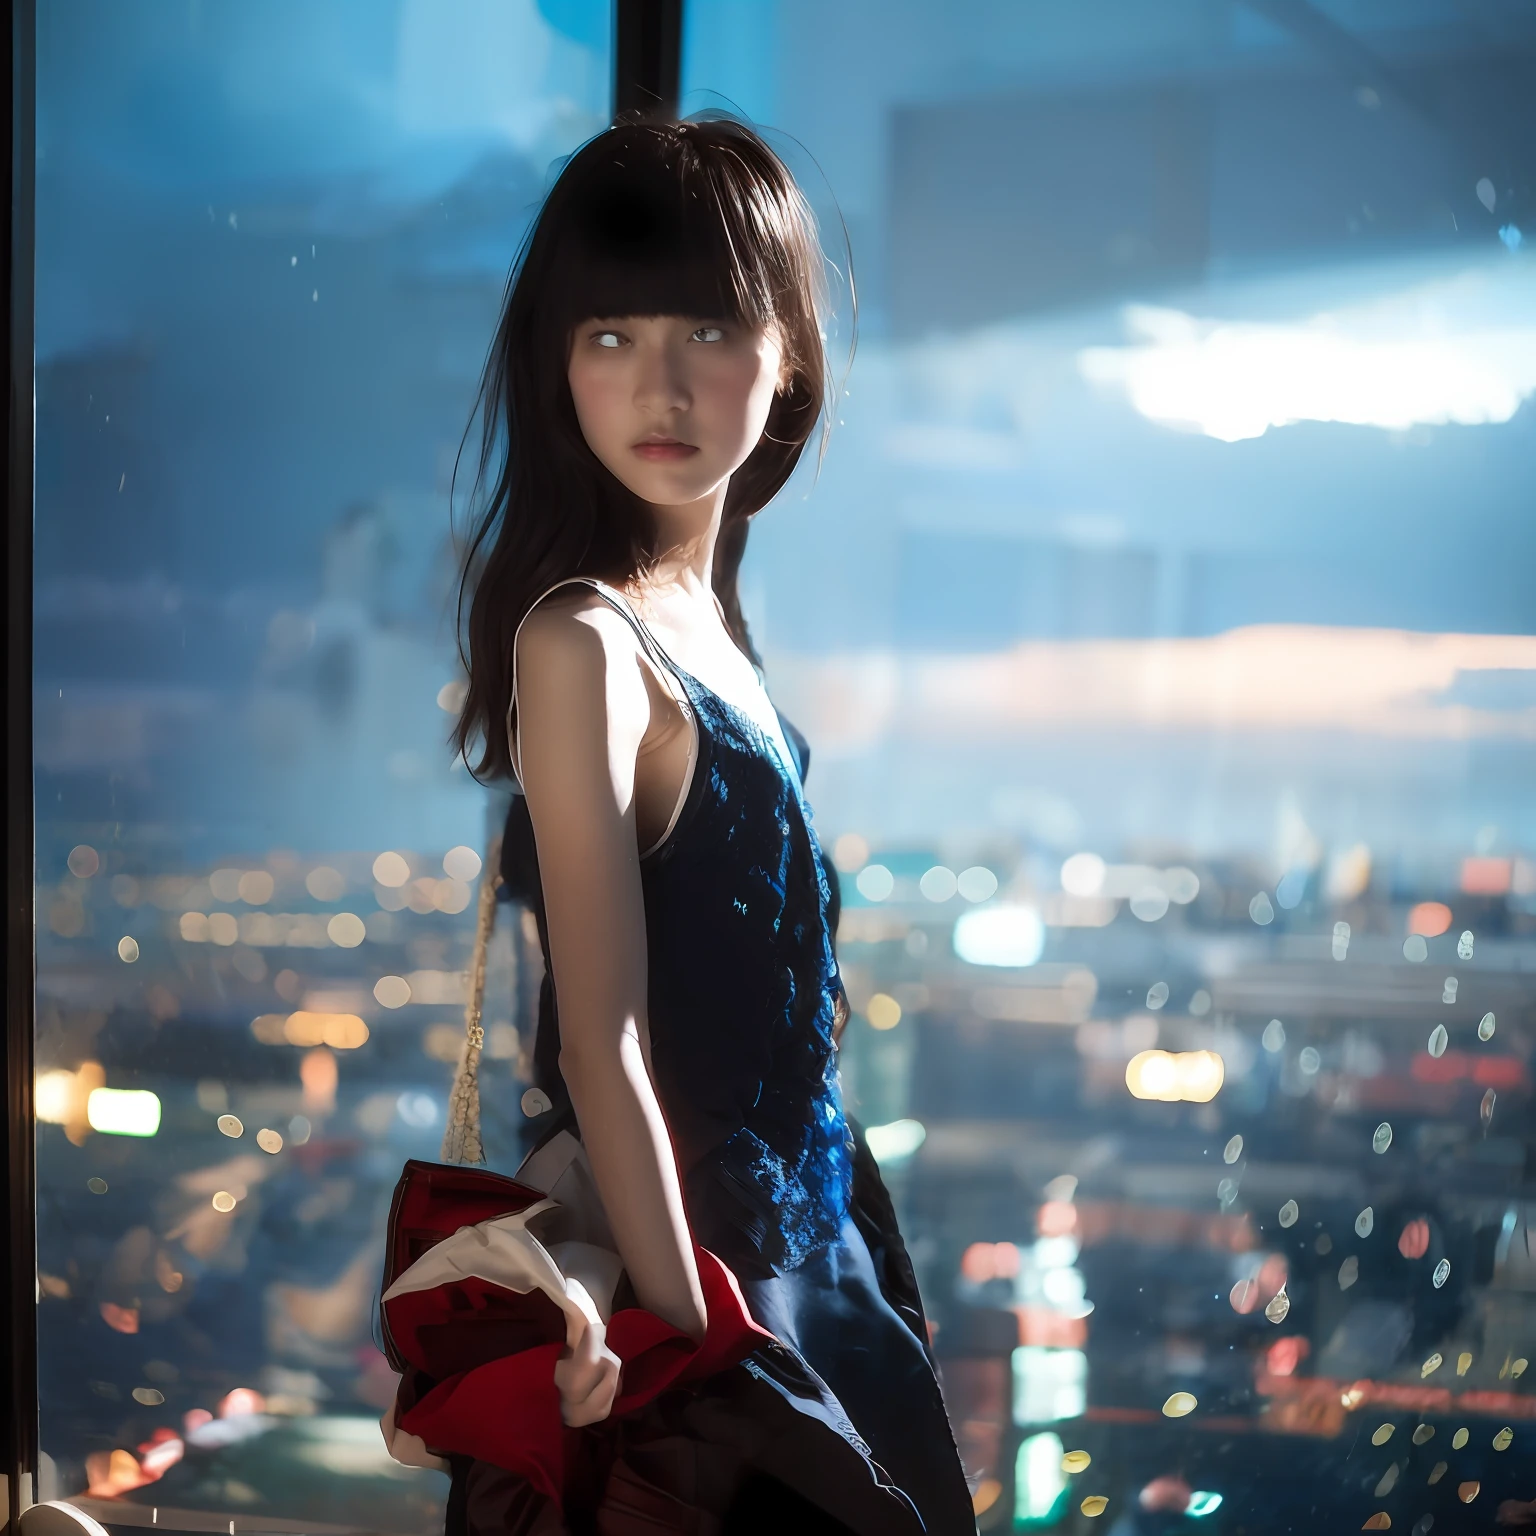 Soft focus background standing in soft focus photo with teenage Japan girl wearing Chanel standing, her face and body are strongly affected by the effect of staged indoor light and shadow